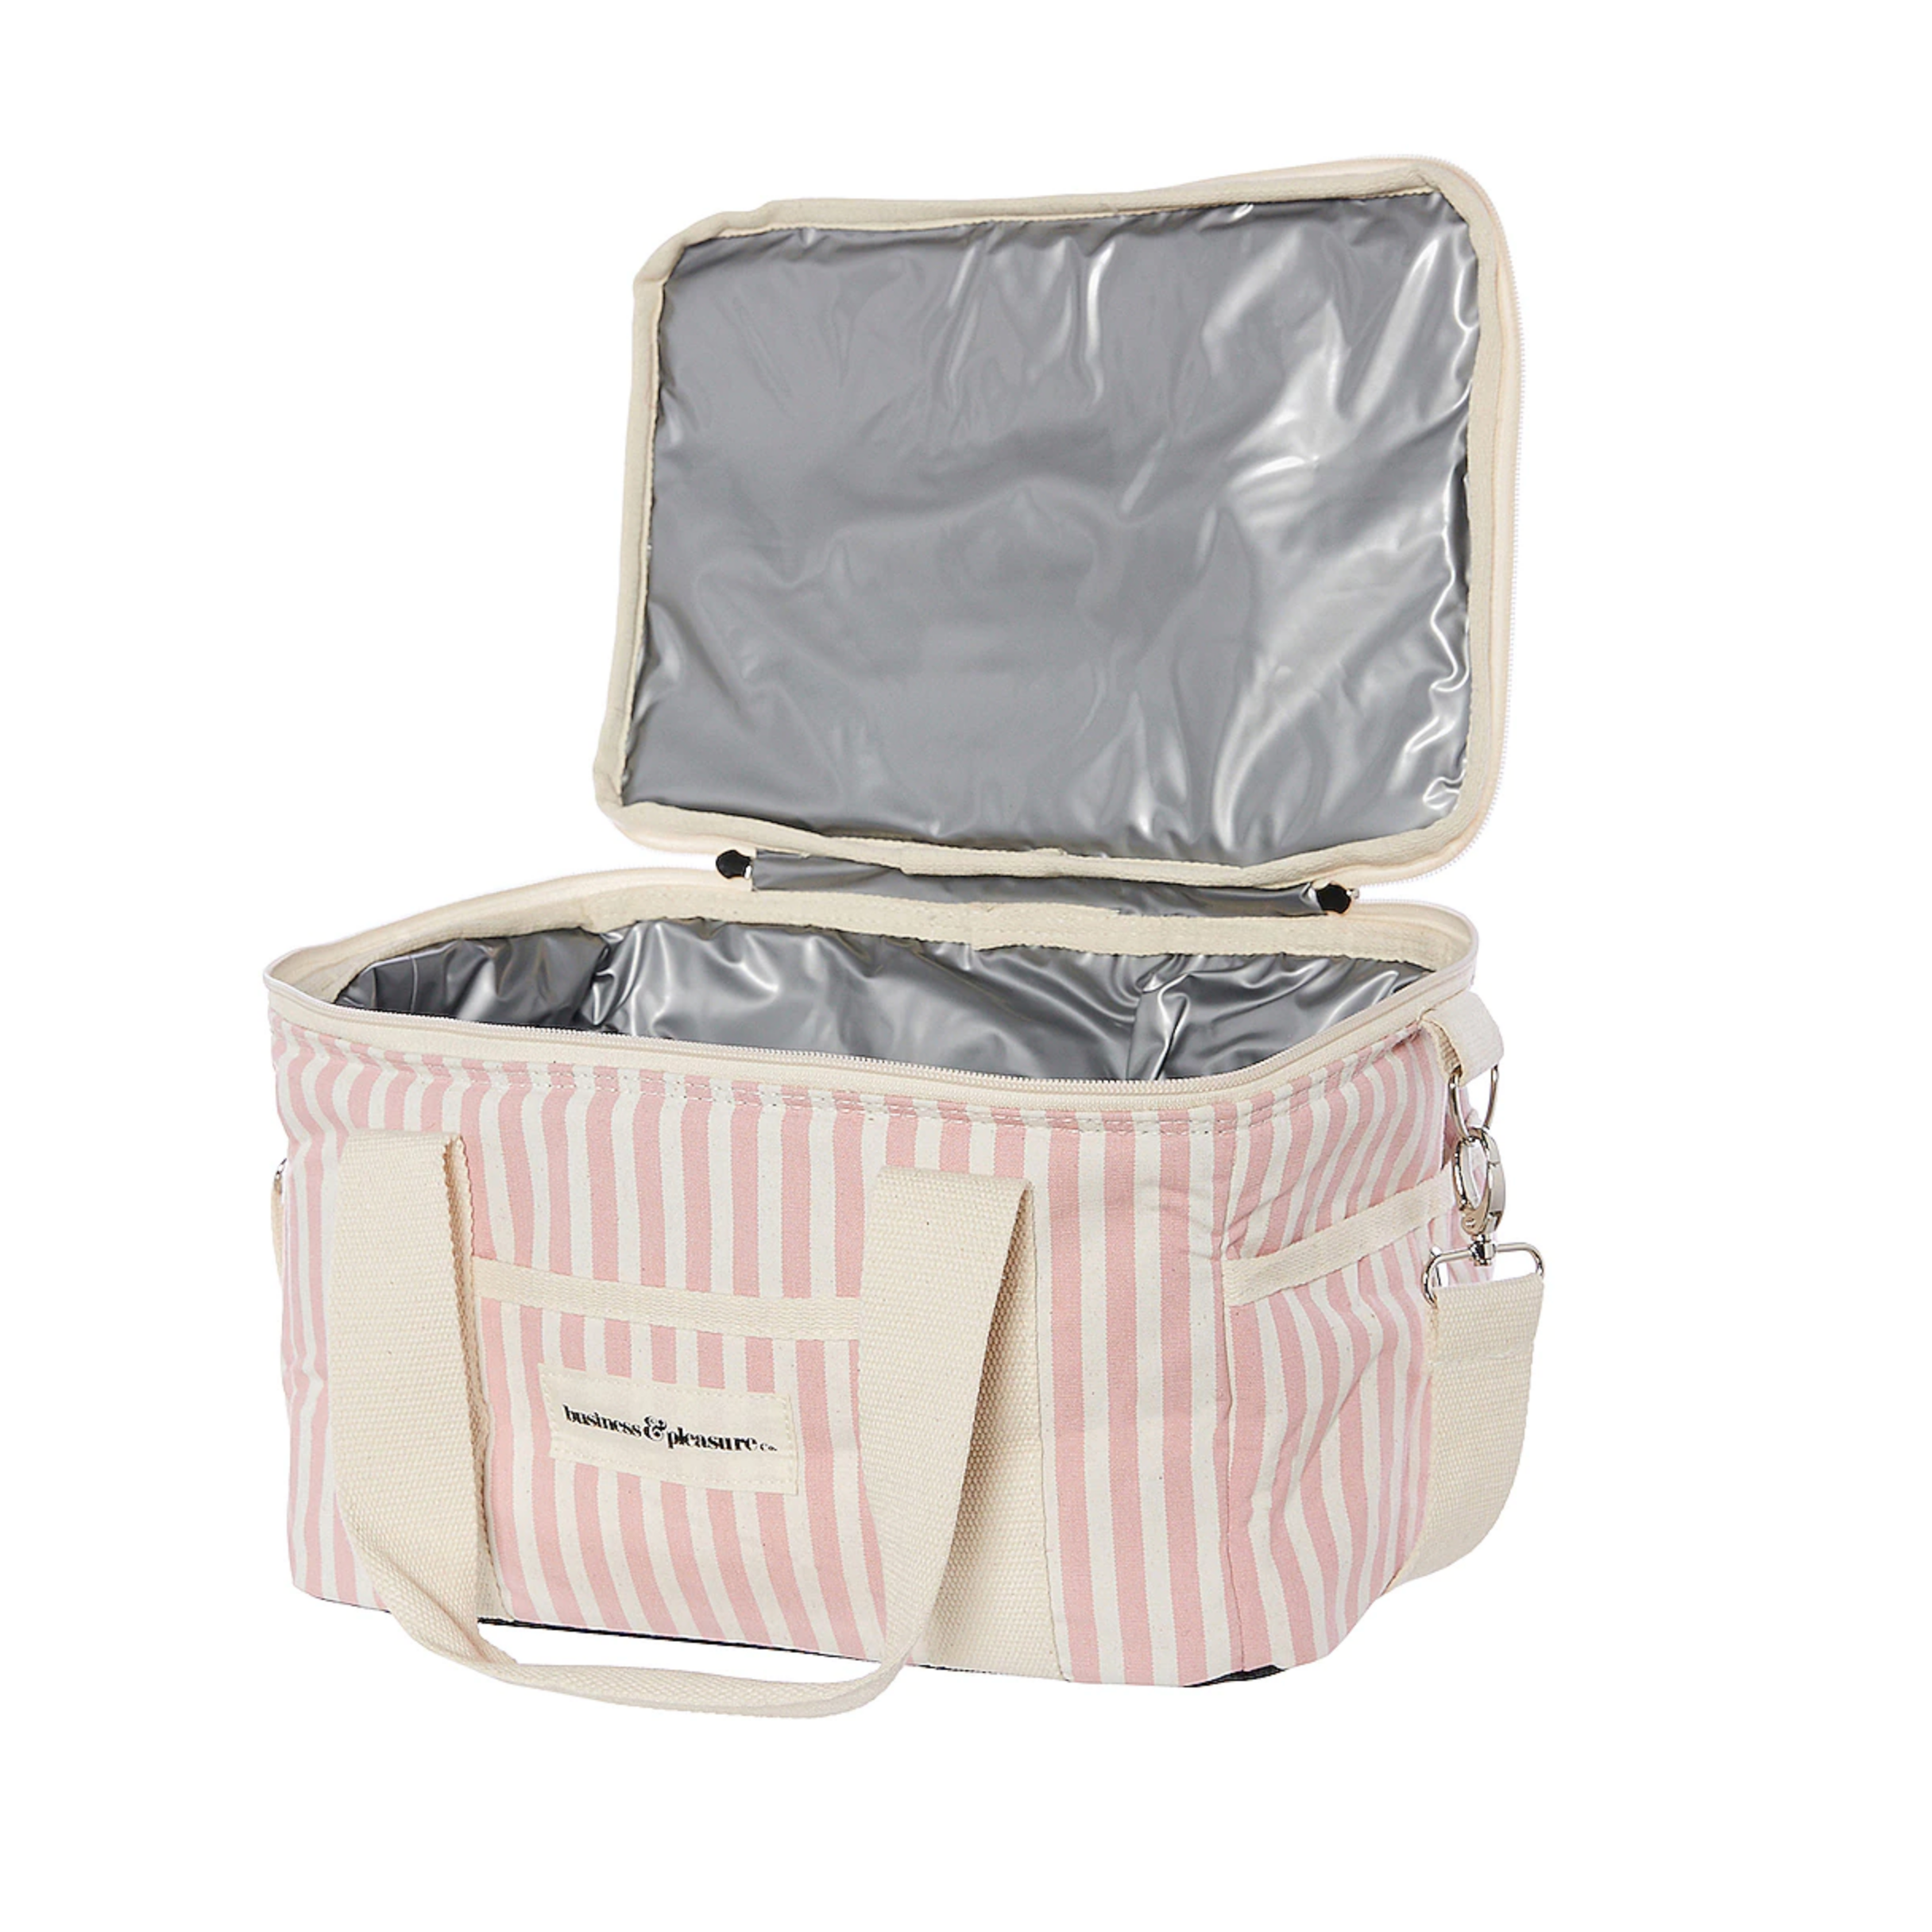 pink striped premium cooler bag opened showing the insulation inside